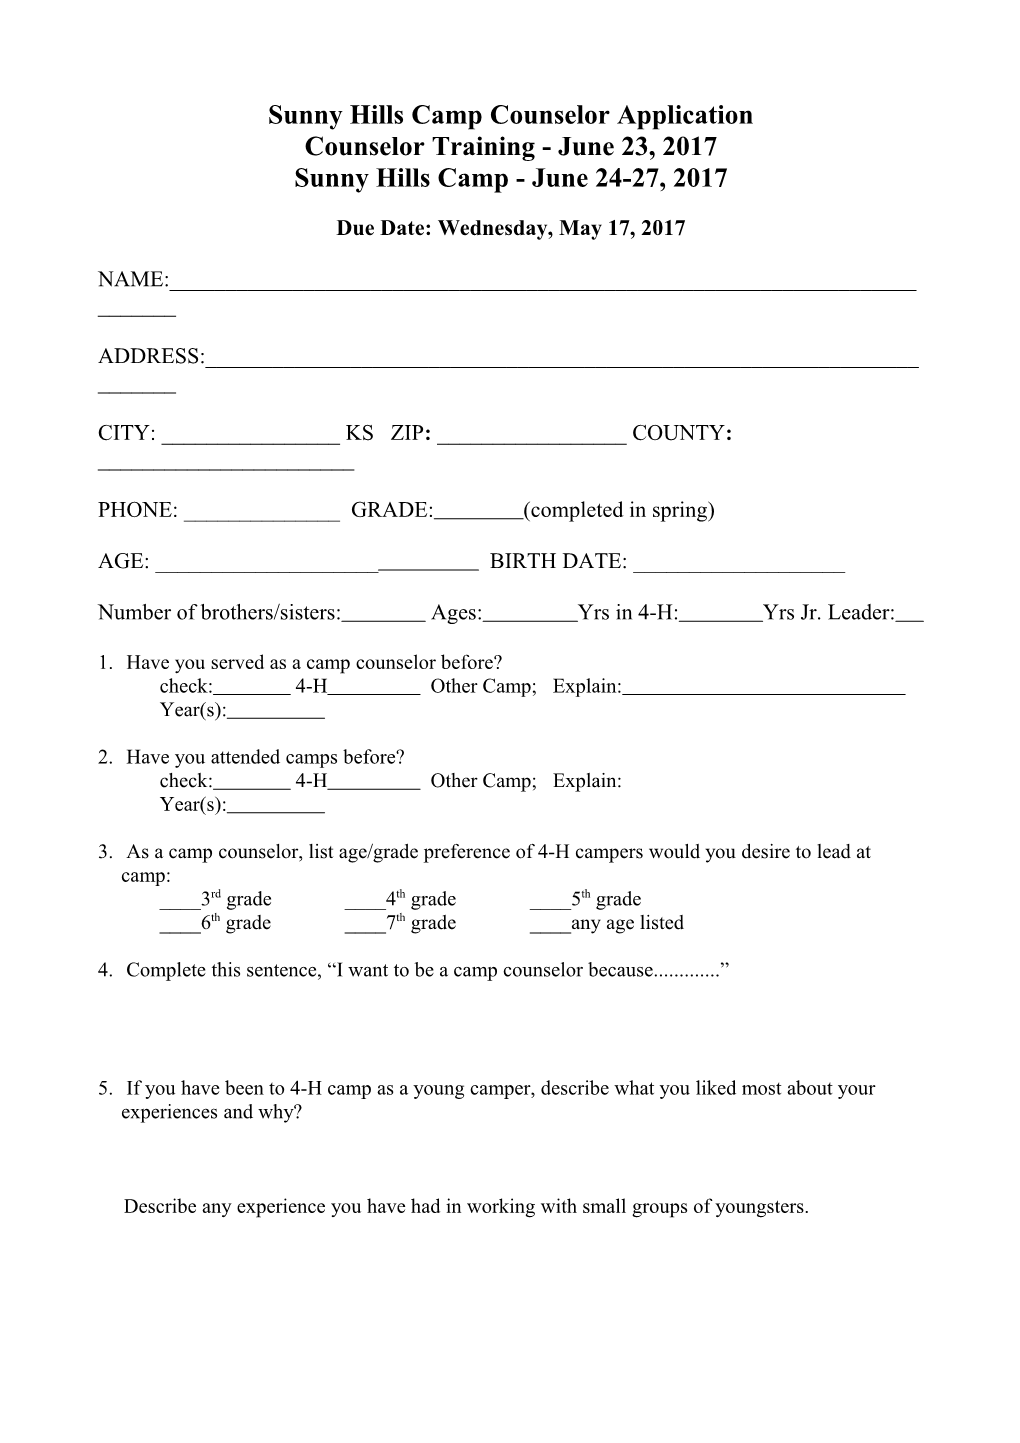 Sunny Hills Camp Counselor Application